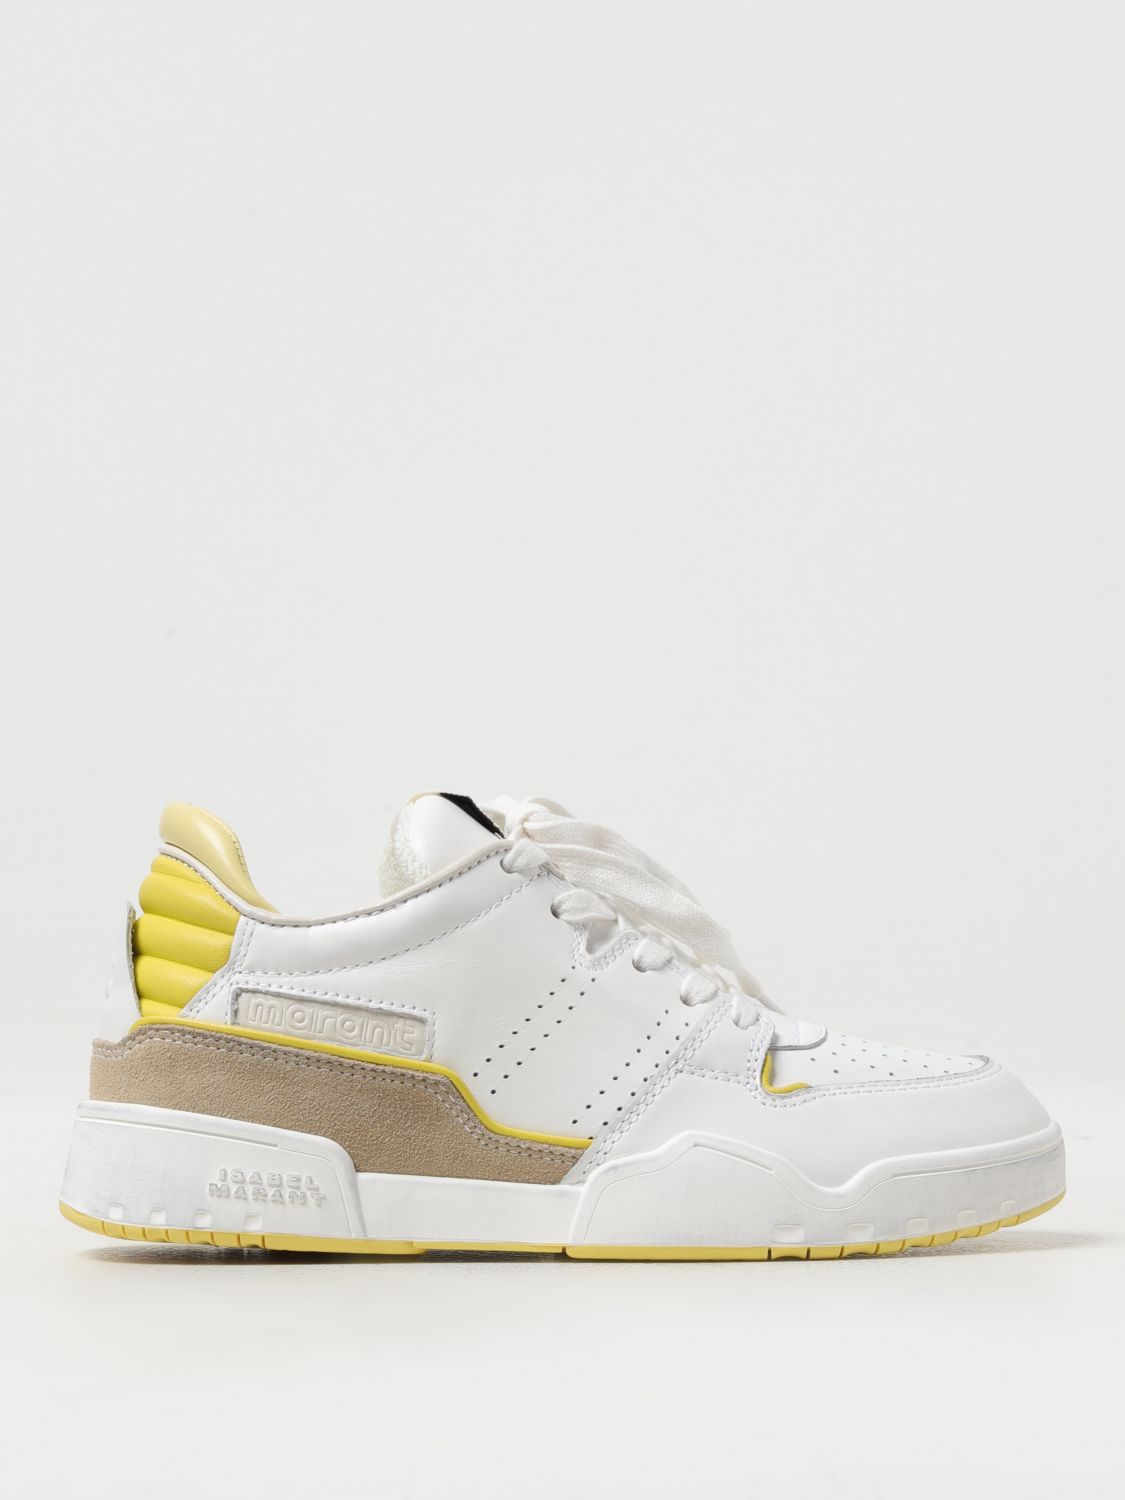 ISABEL MARANT SNEAKERS ISABEL MARANT WOMAN COLOR YELLOW,F18338003